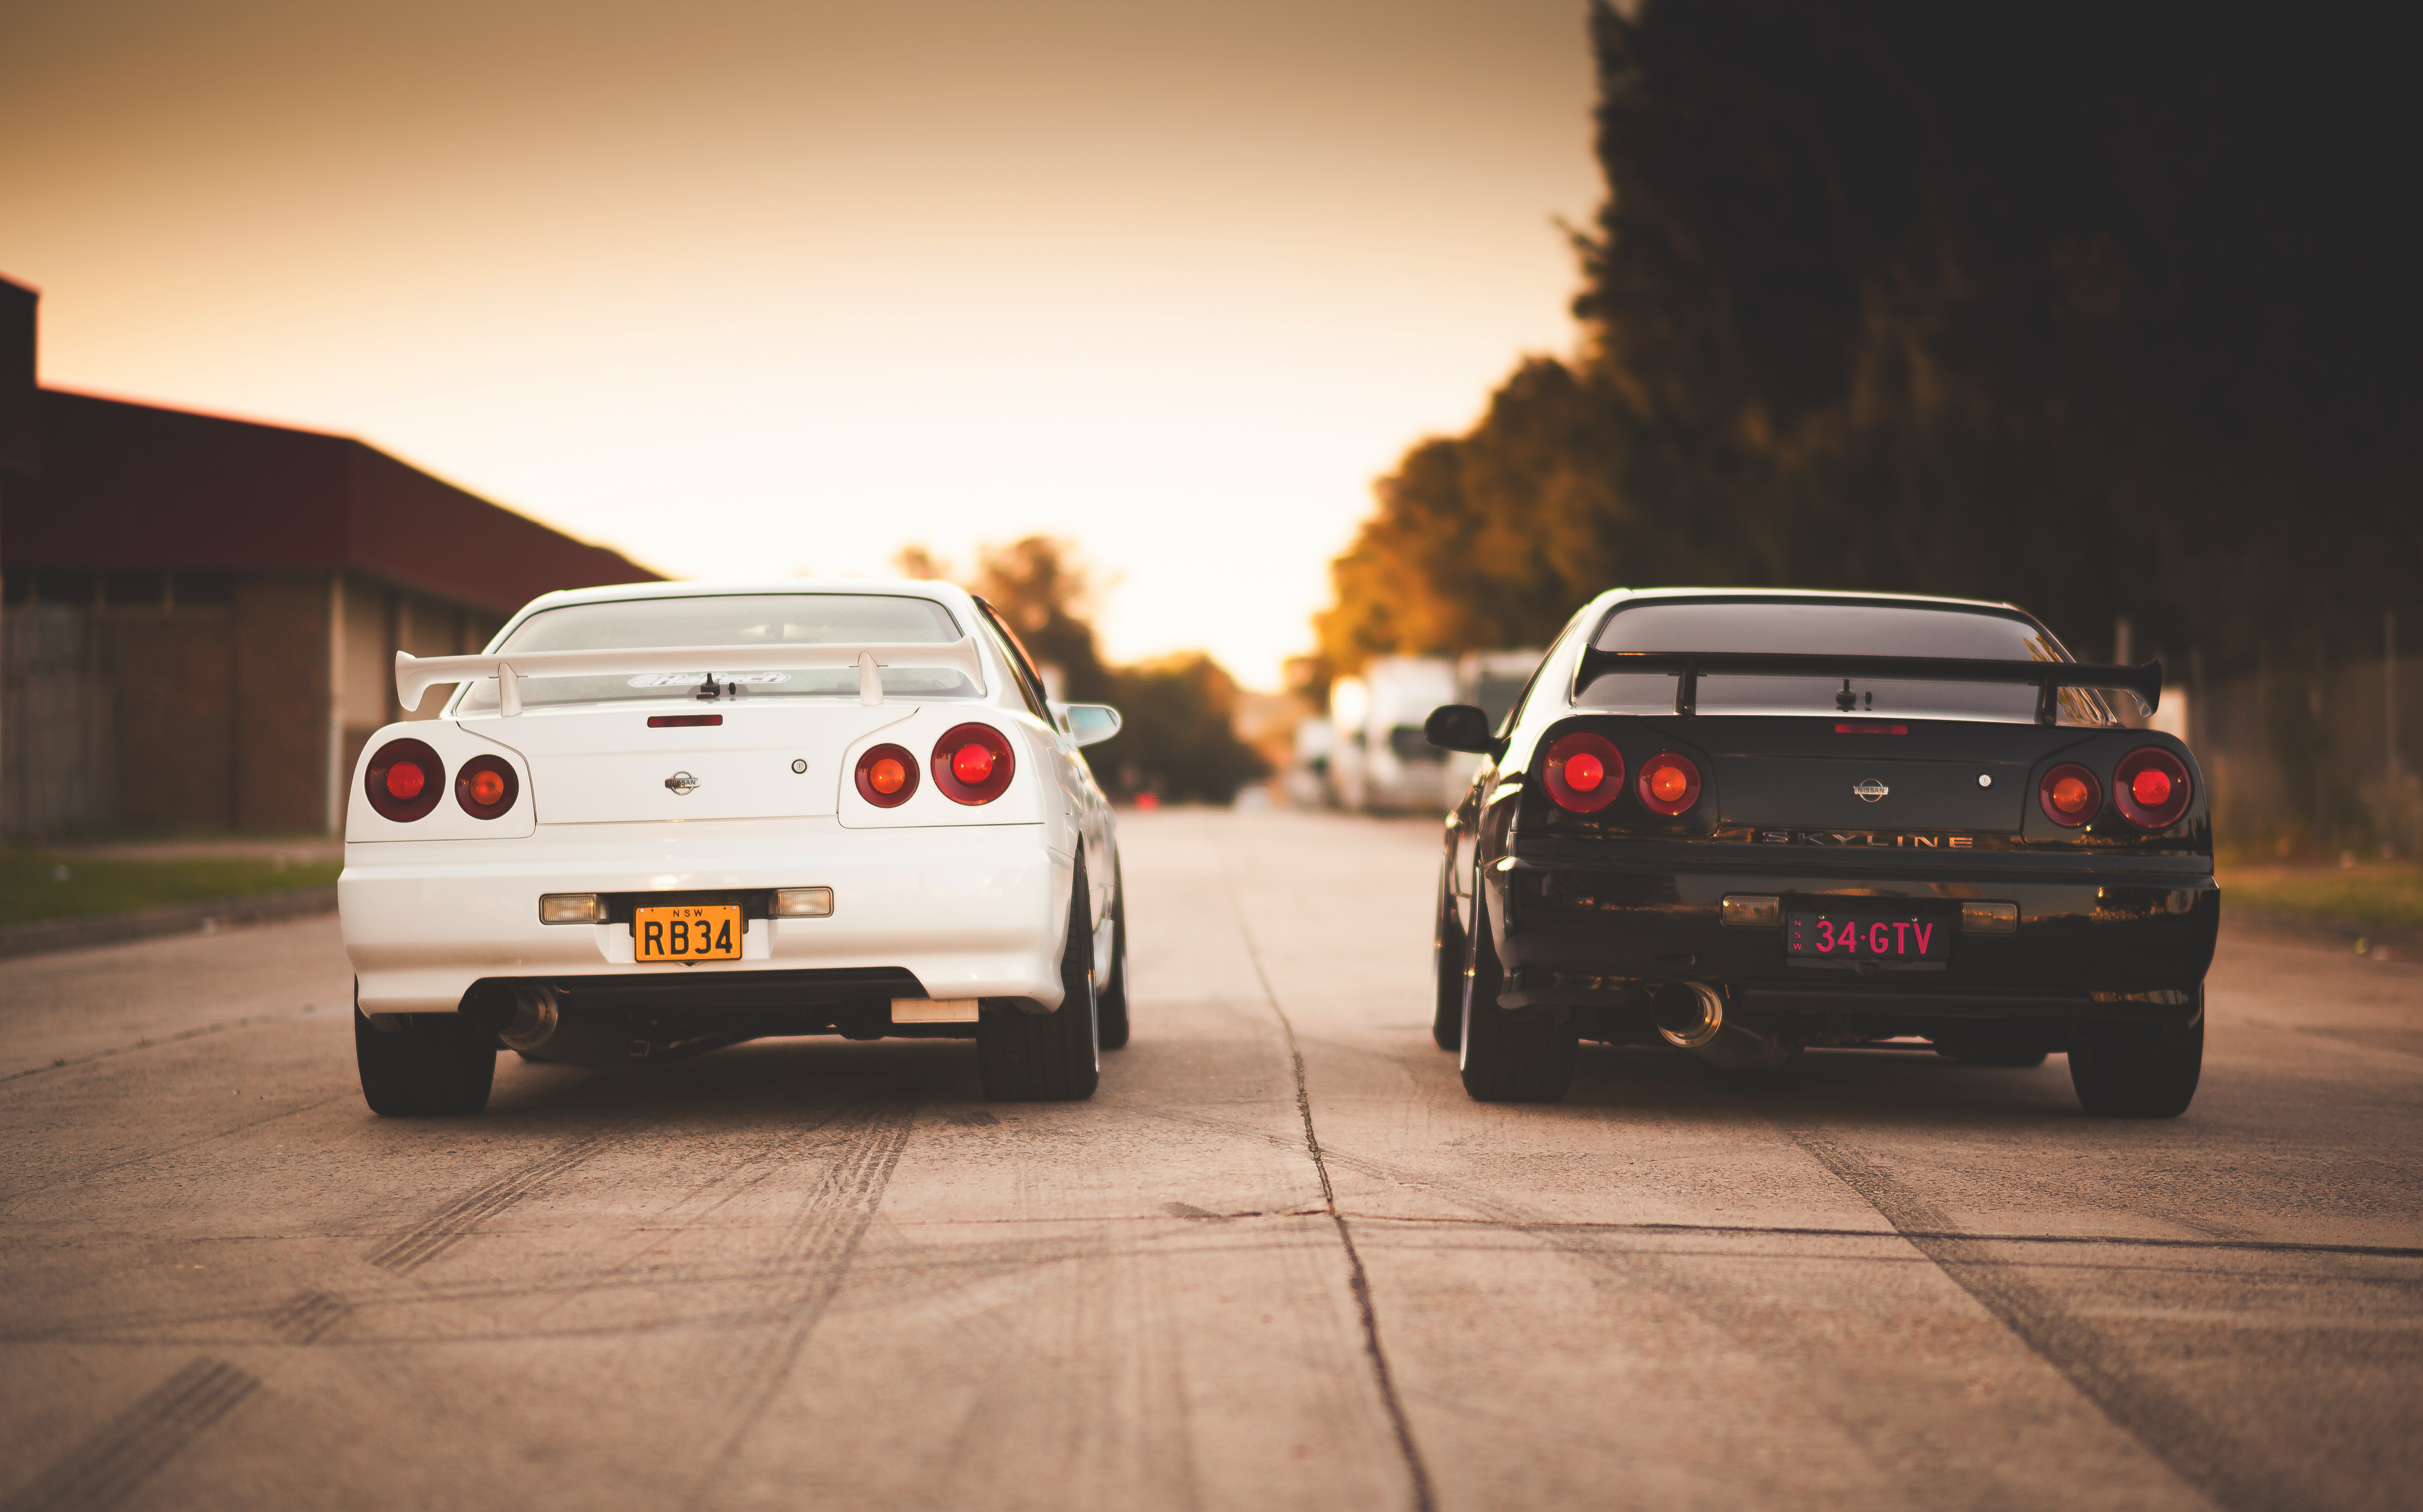 64 Nissan Skyline HD Wallpapers | Backgrounds - Wallpaper Abyss